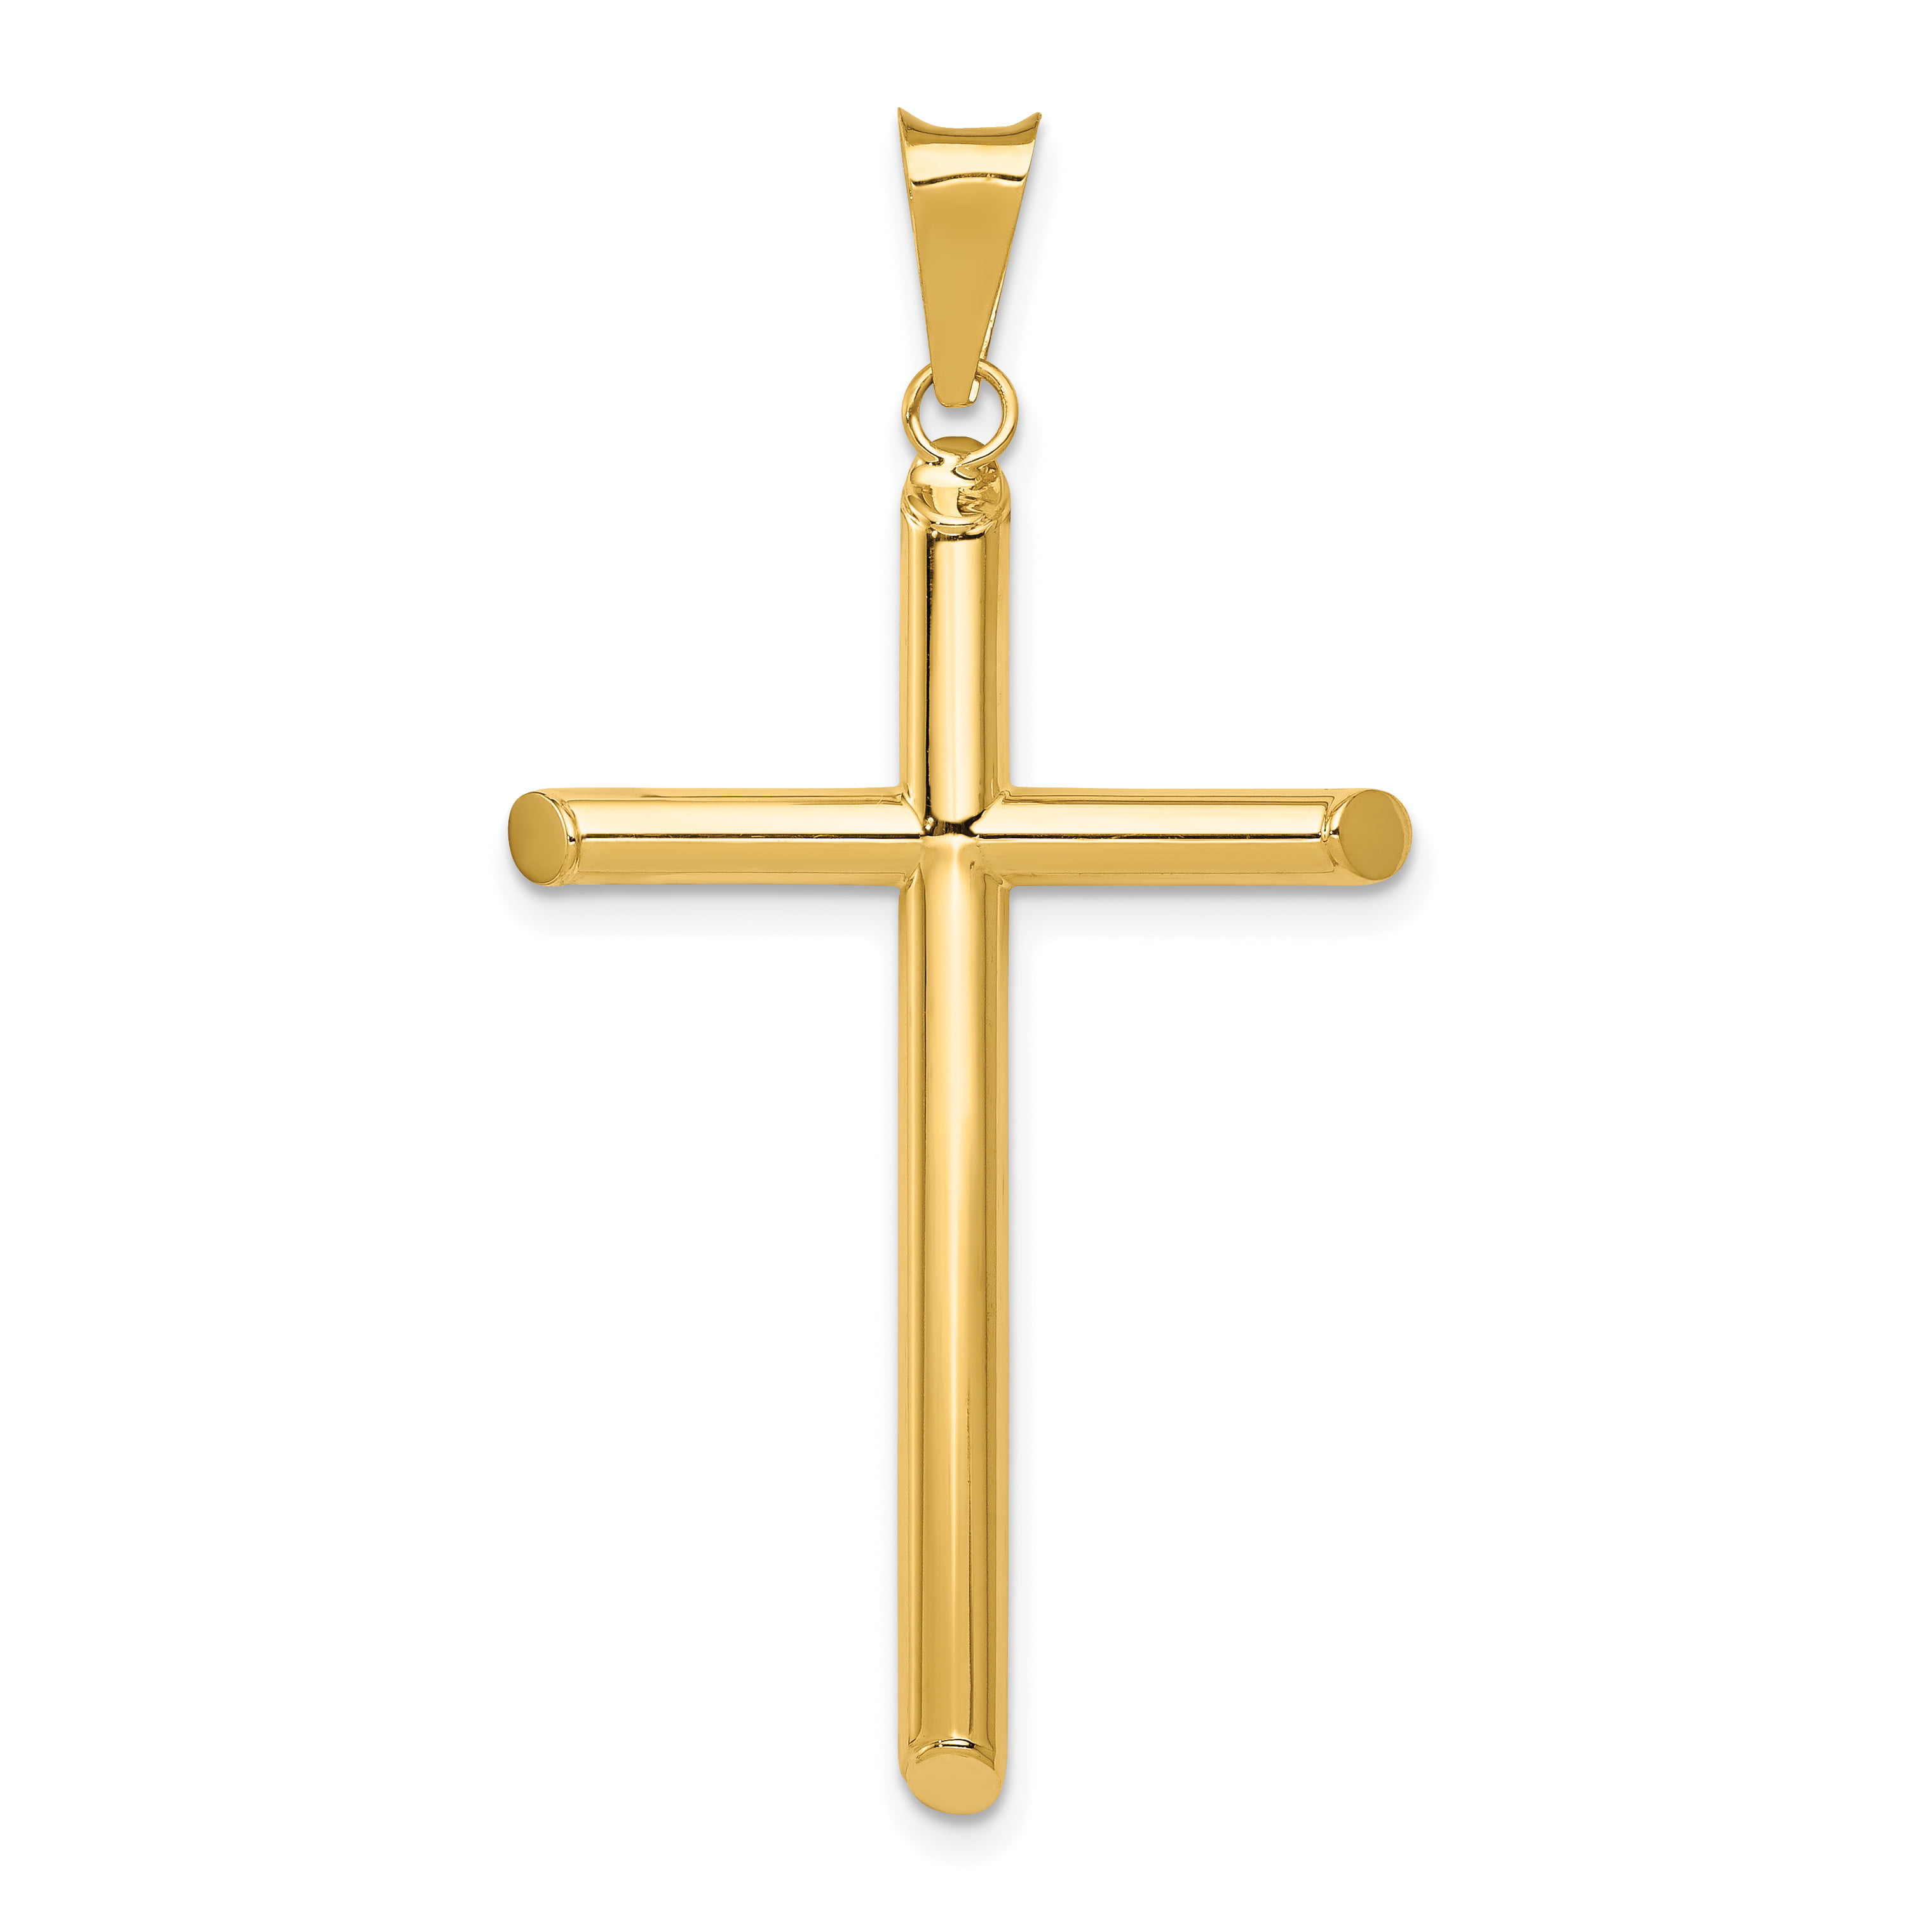 14k Yellow Gold Tube Cross Religious Pendant Charm Necklace Fine Jewelry Gifts For Women For Her 